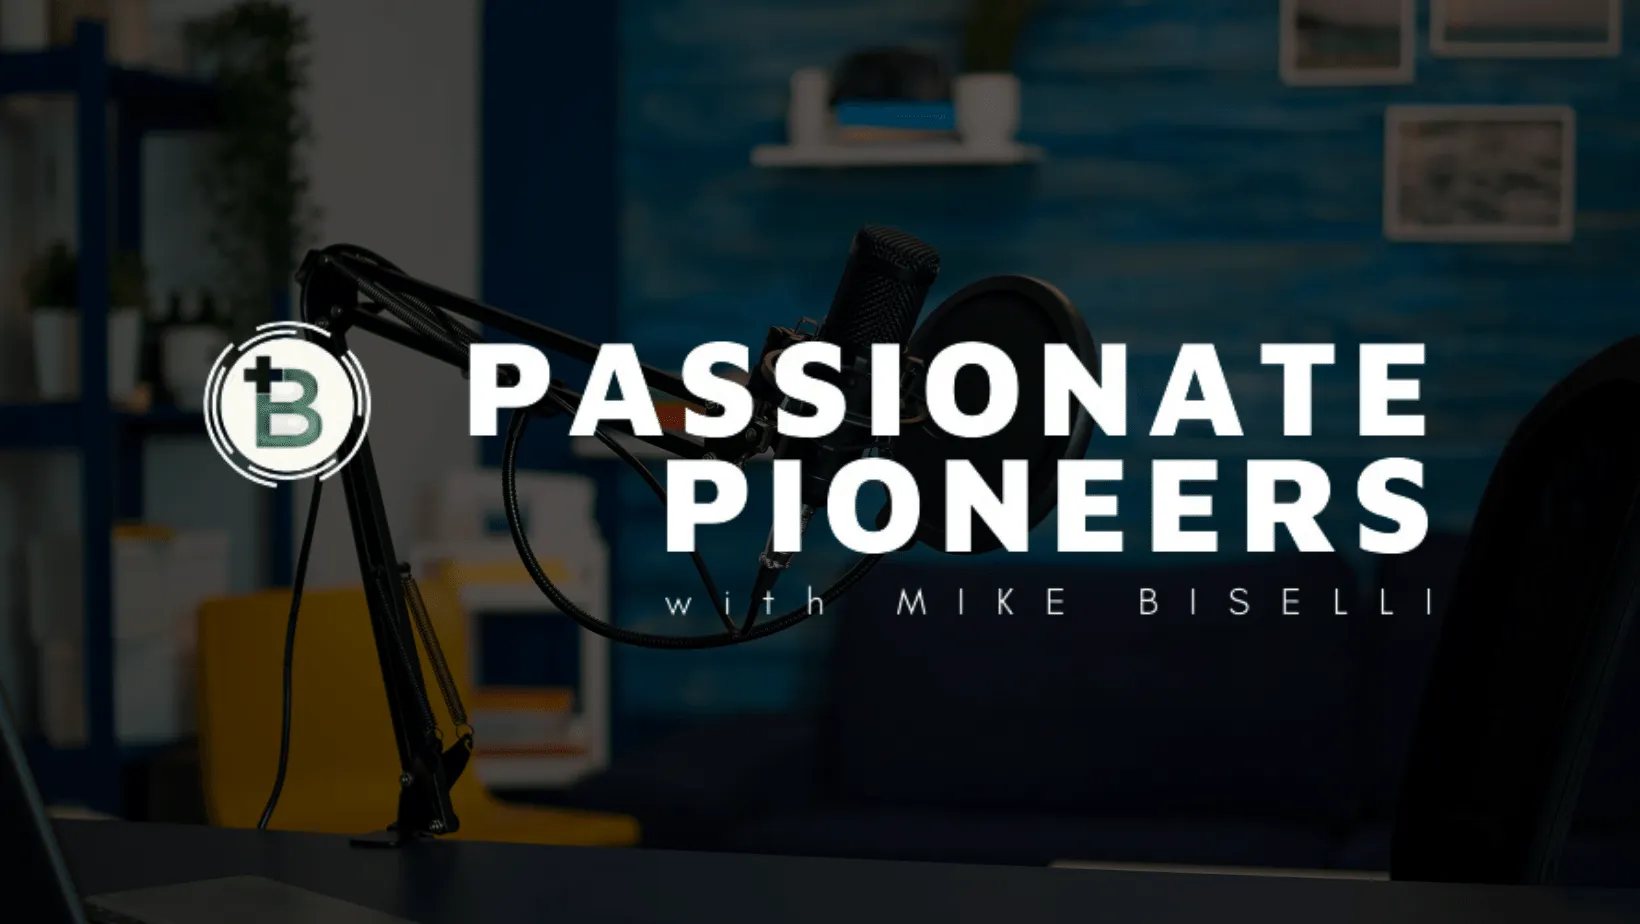 White Passionate Pioneers with Mike Biselli podcast logo over a dark background.